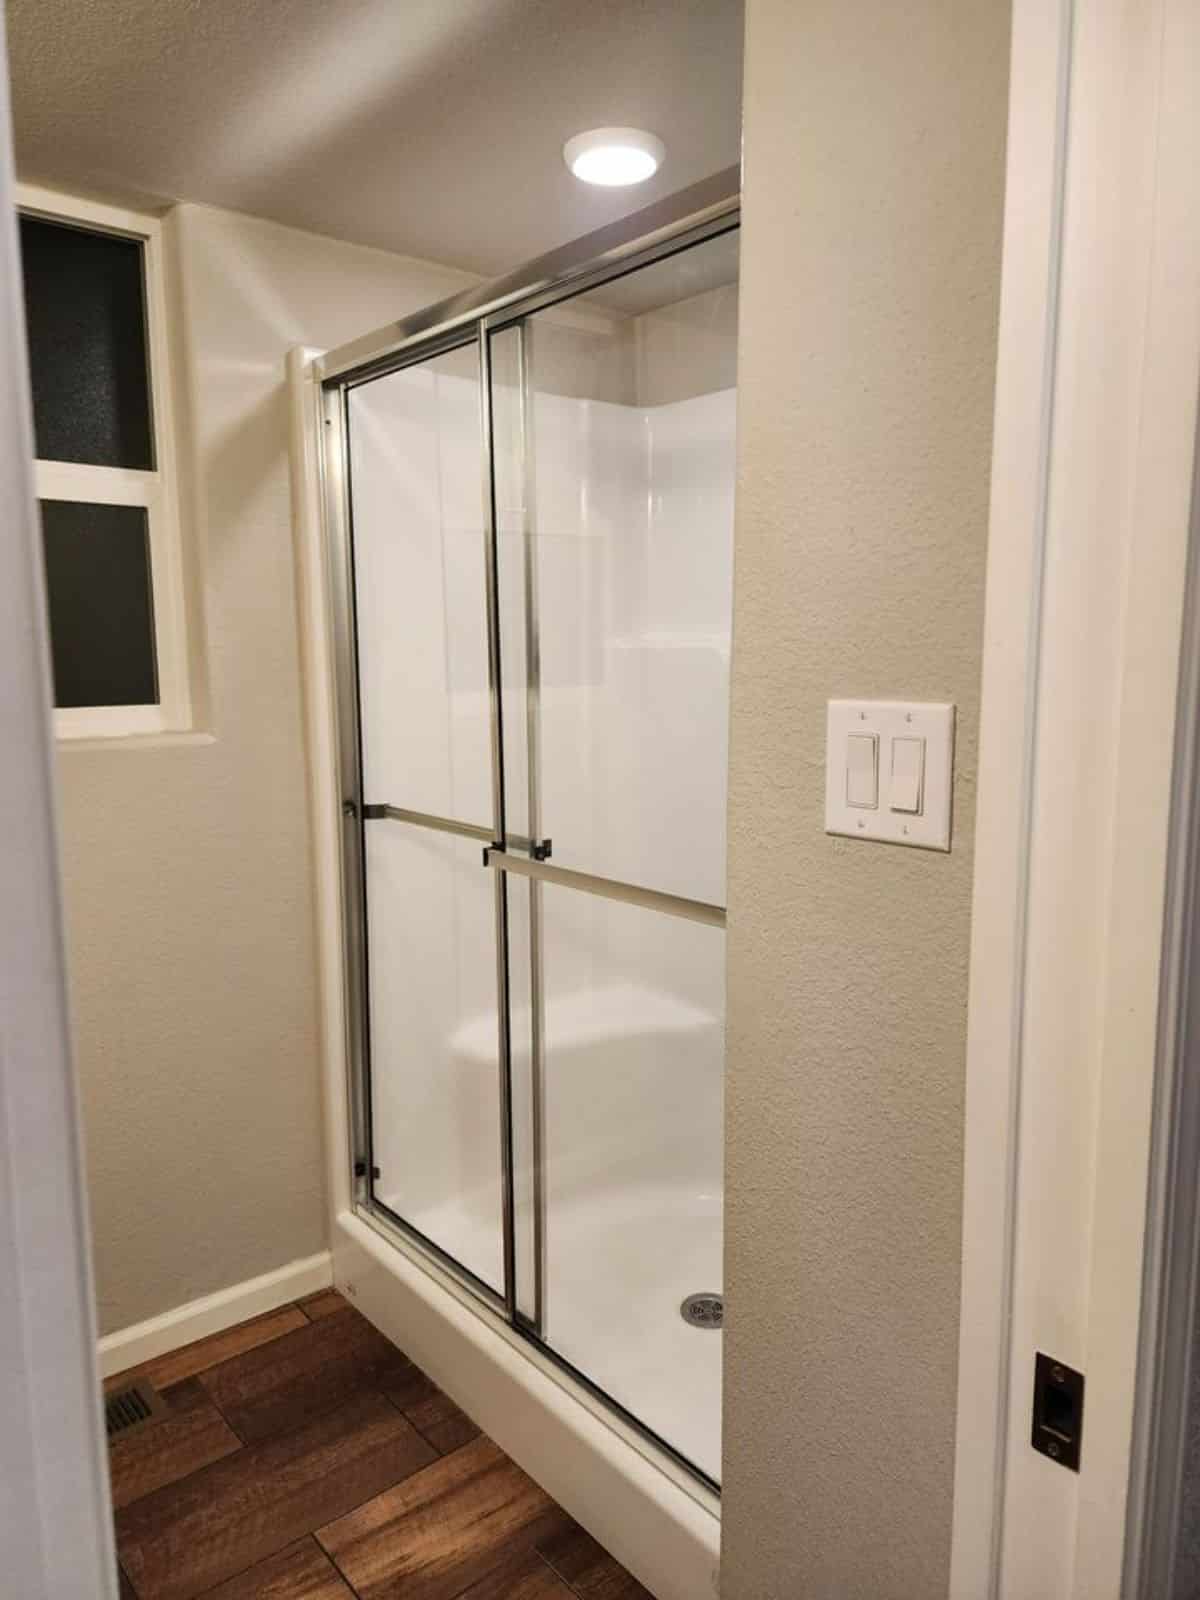 Glass shower enclosure in bathroom of Spacious Tiny House